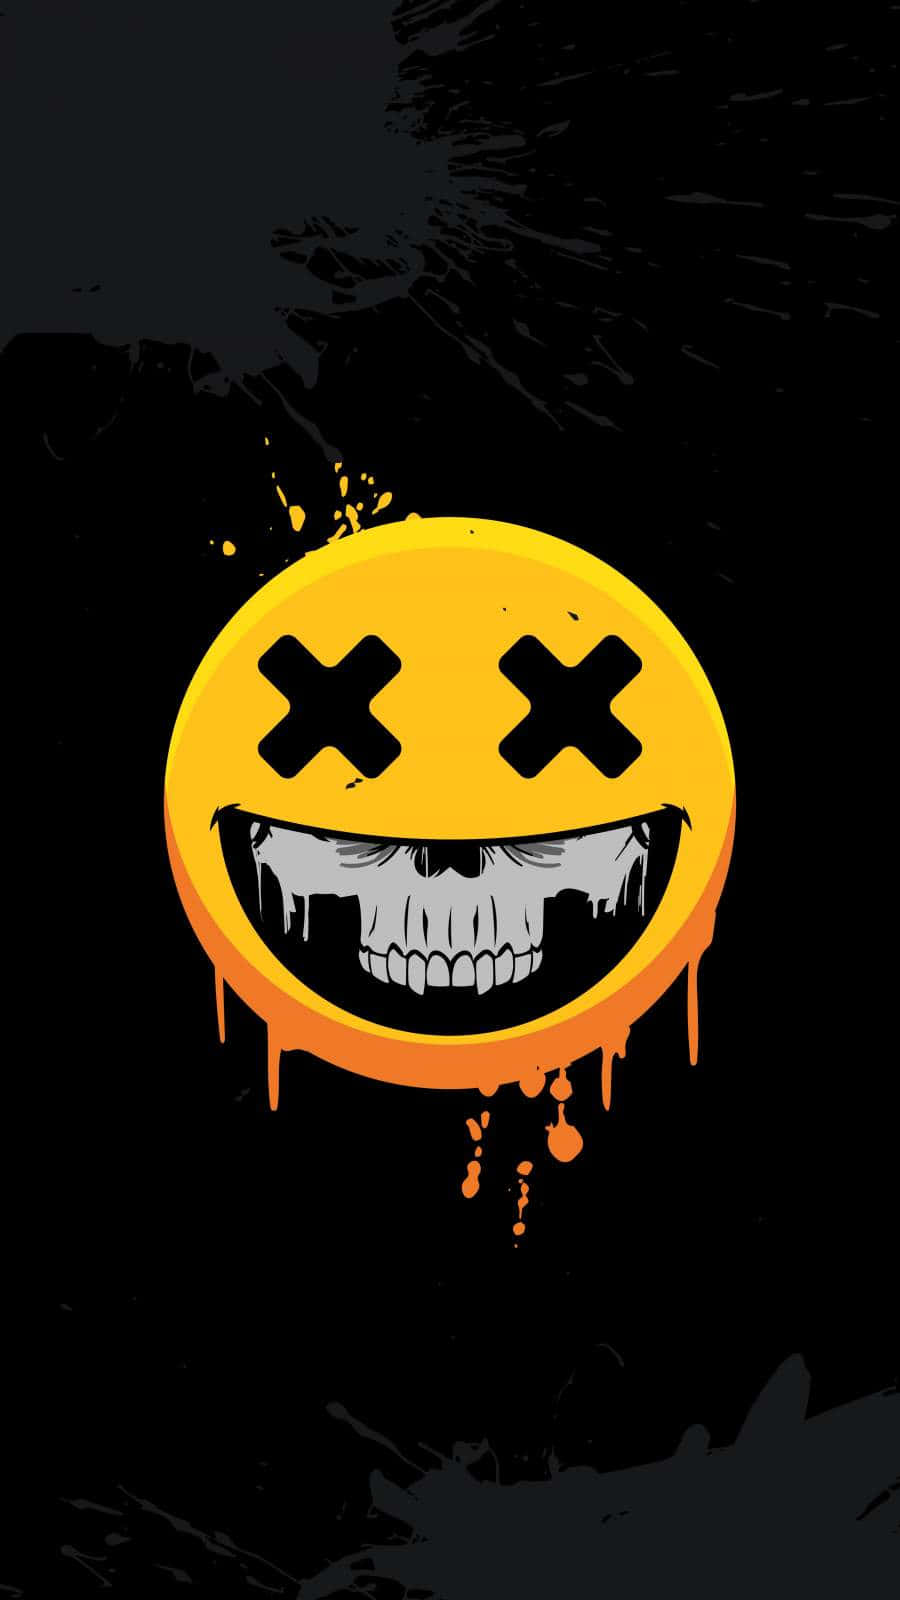 A Yellow Smiley Face Logo On A Black Background Wallpaper